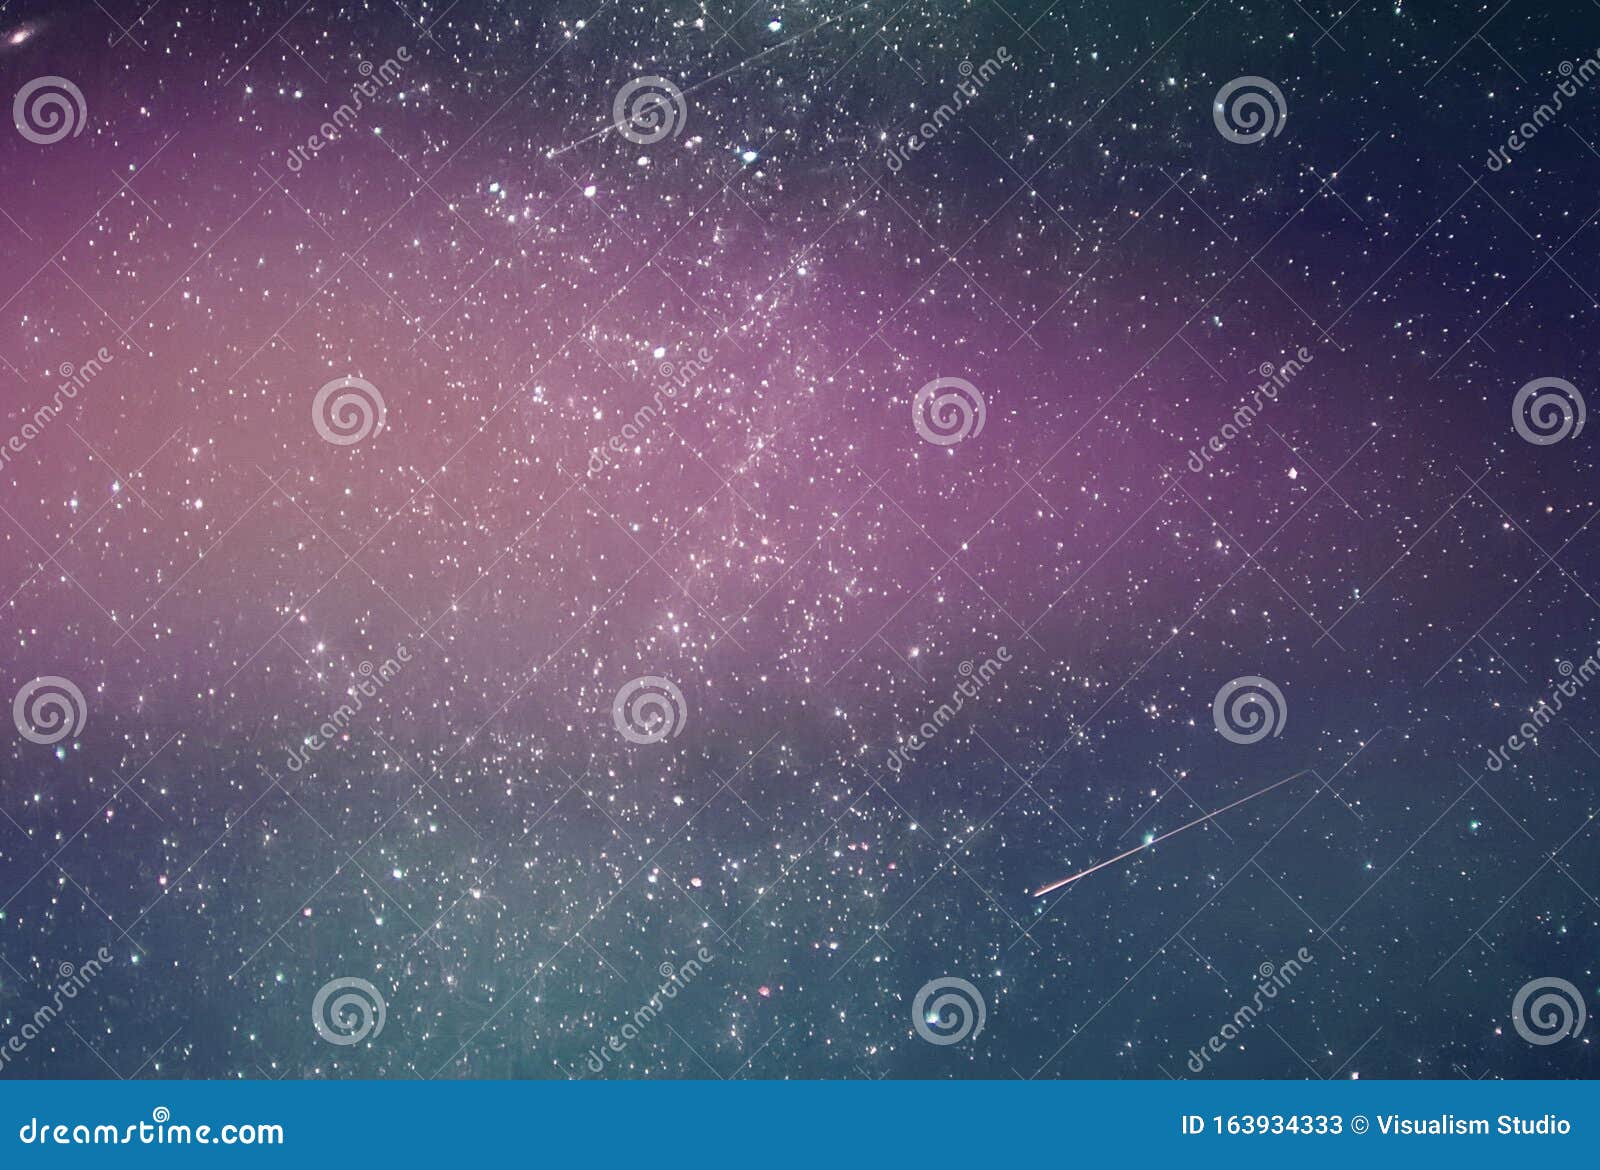 Abstract Galaxy Background With Stars And Planets With Pink Galaxy